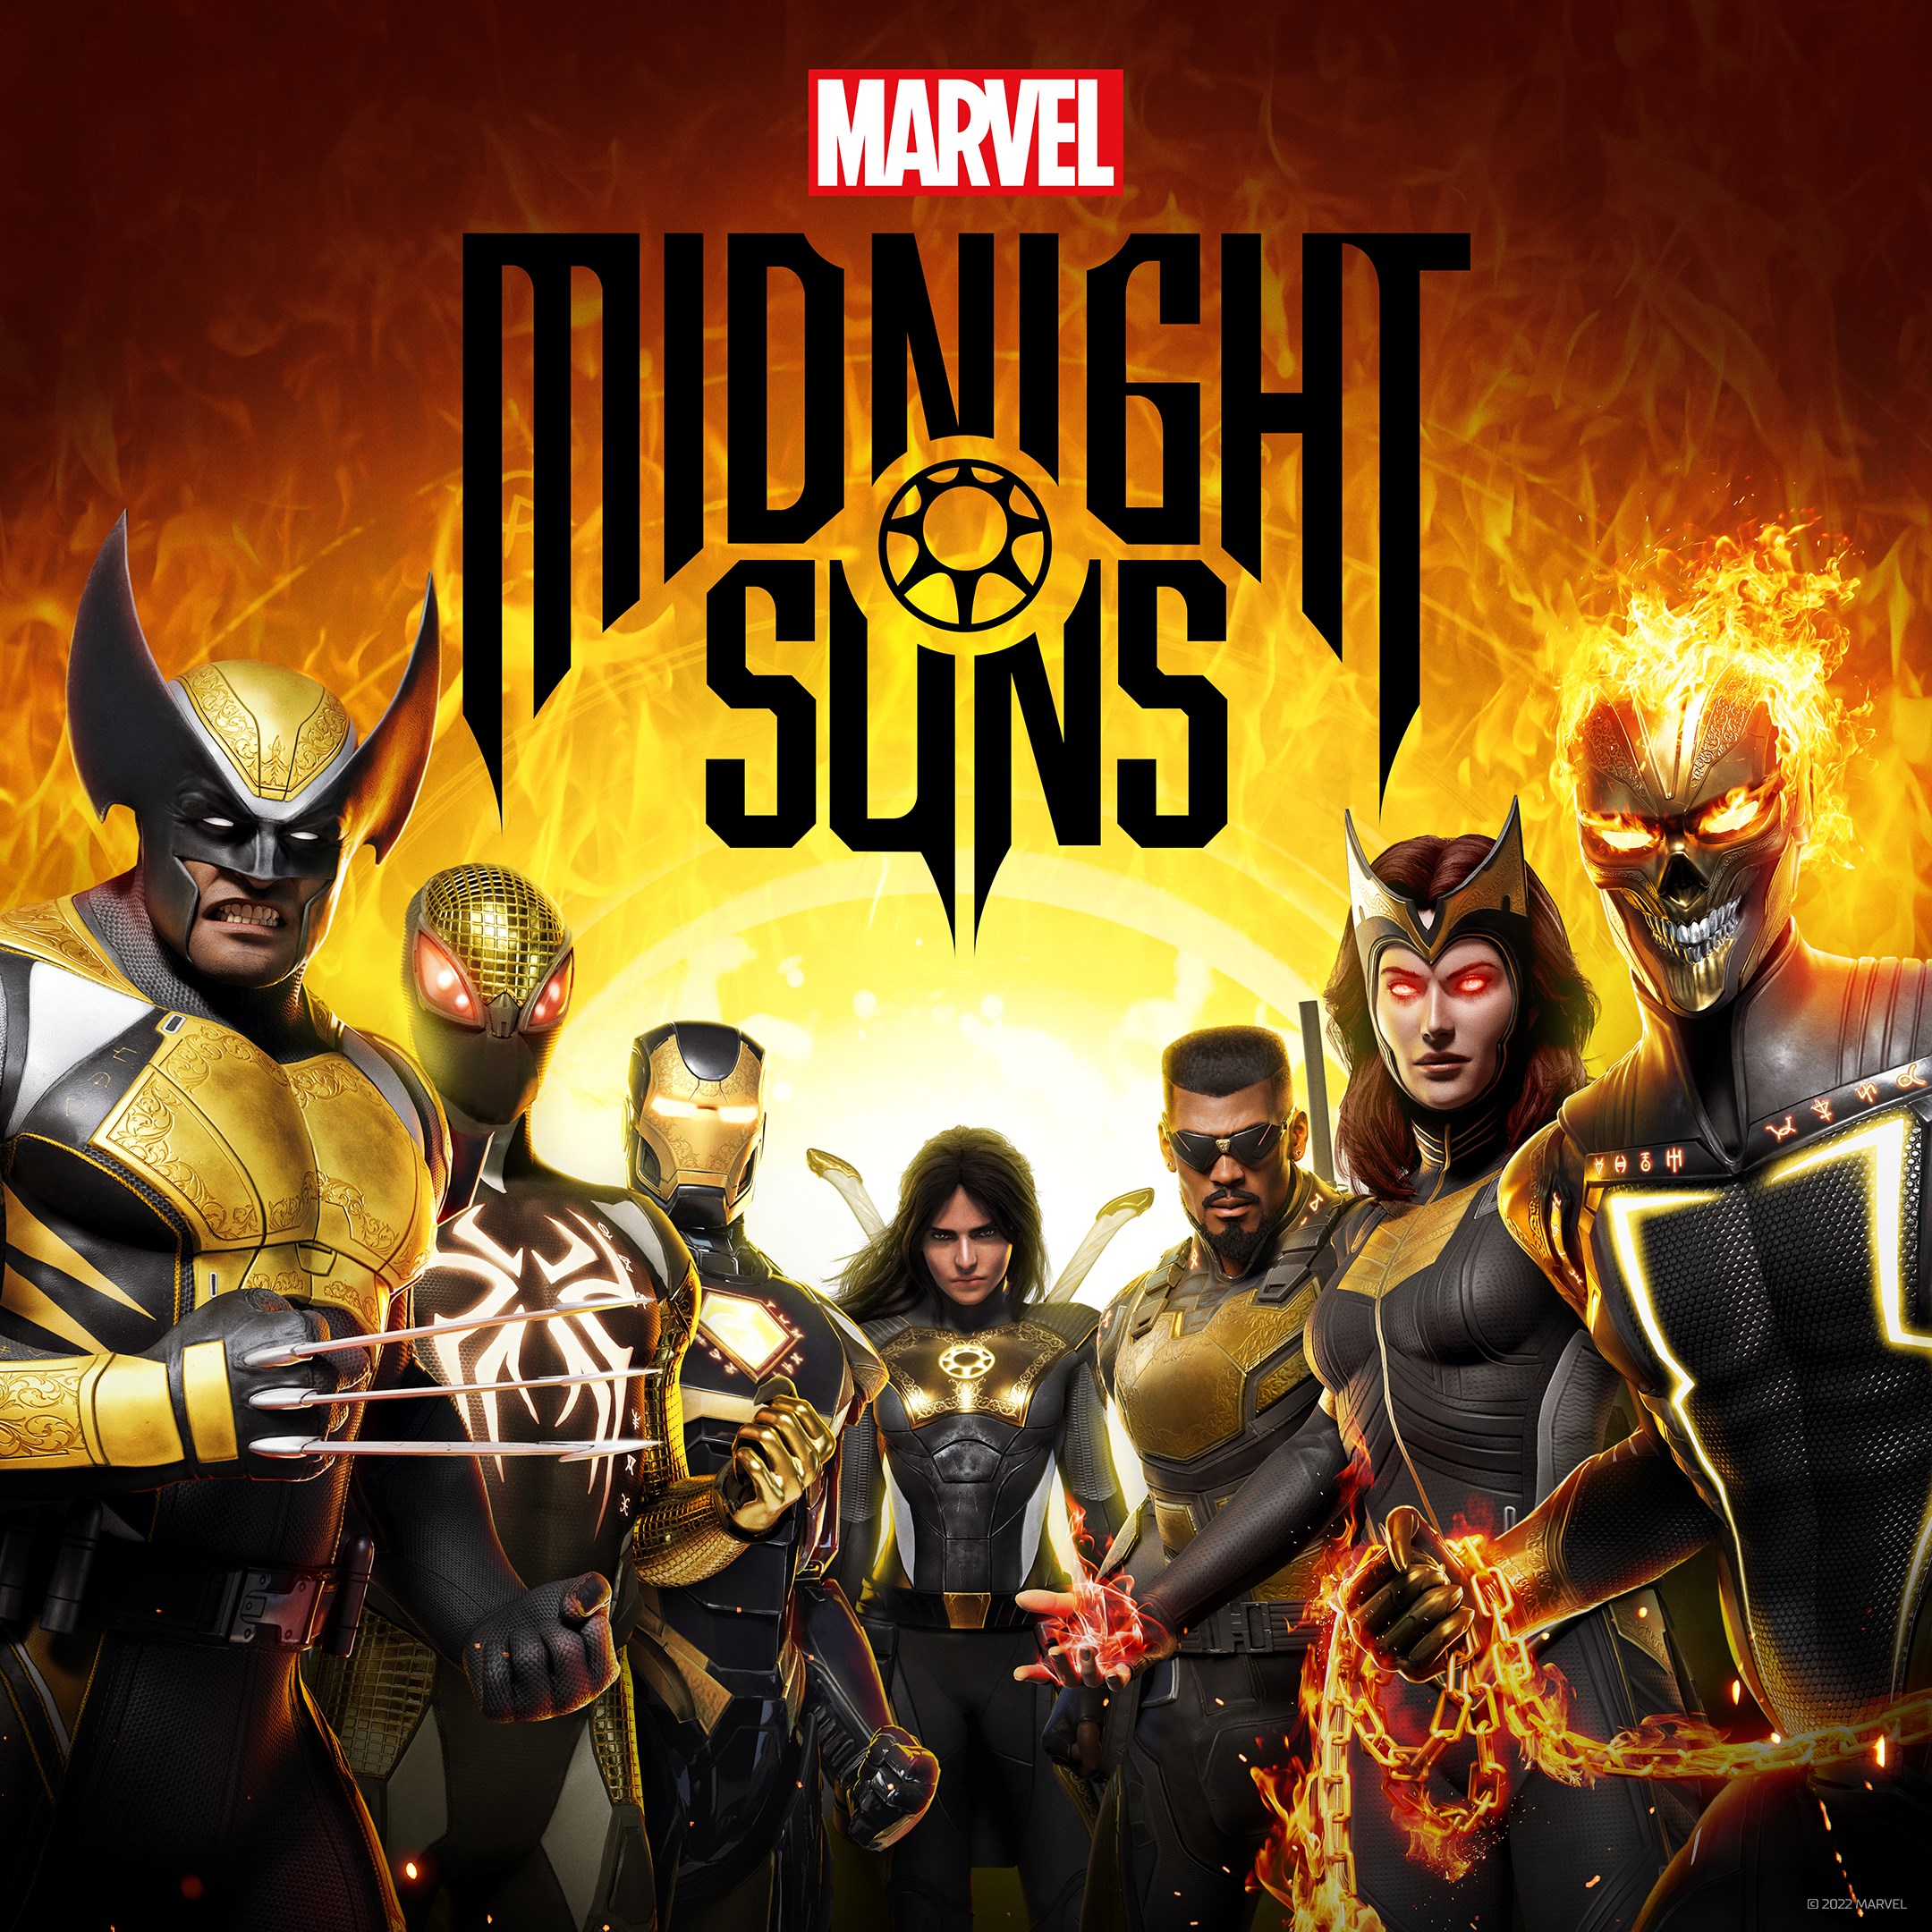 Image for Marvel's Midnight Suns